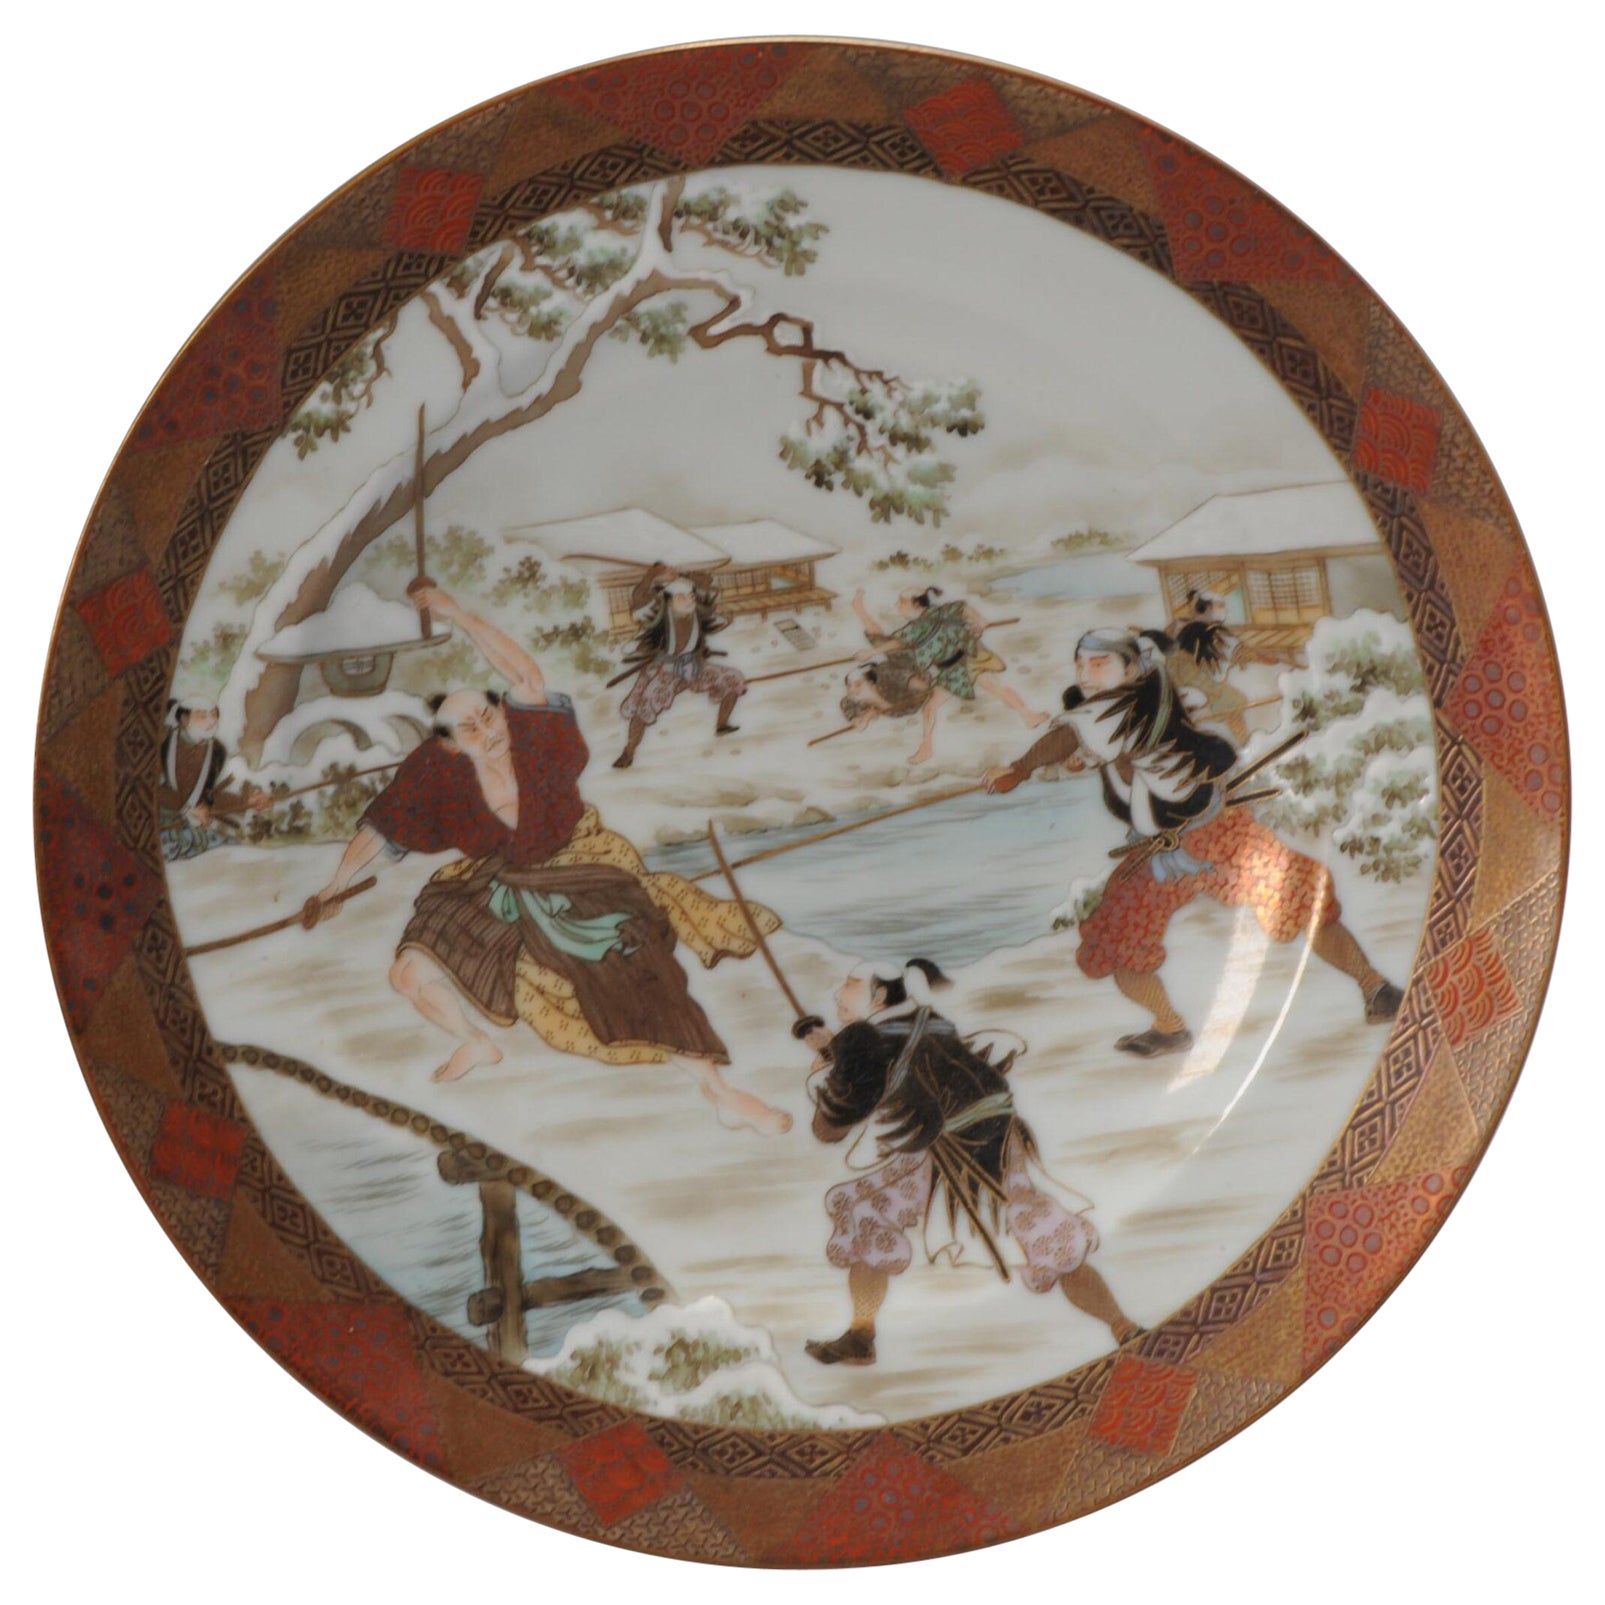 Antique Japanese Porcelain Dish with Warriors Top Quality Work Japan Marked Base For Sale